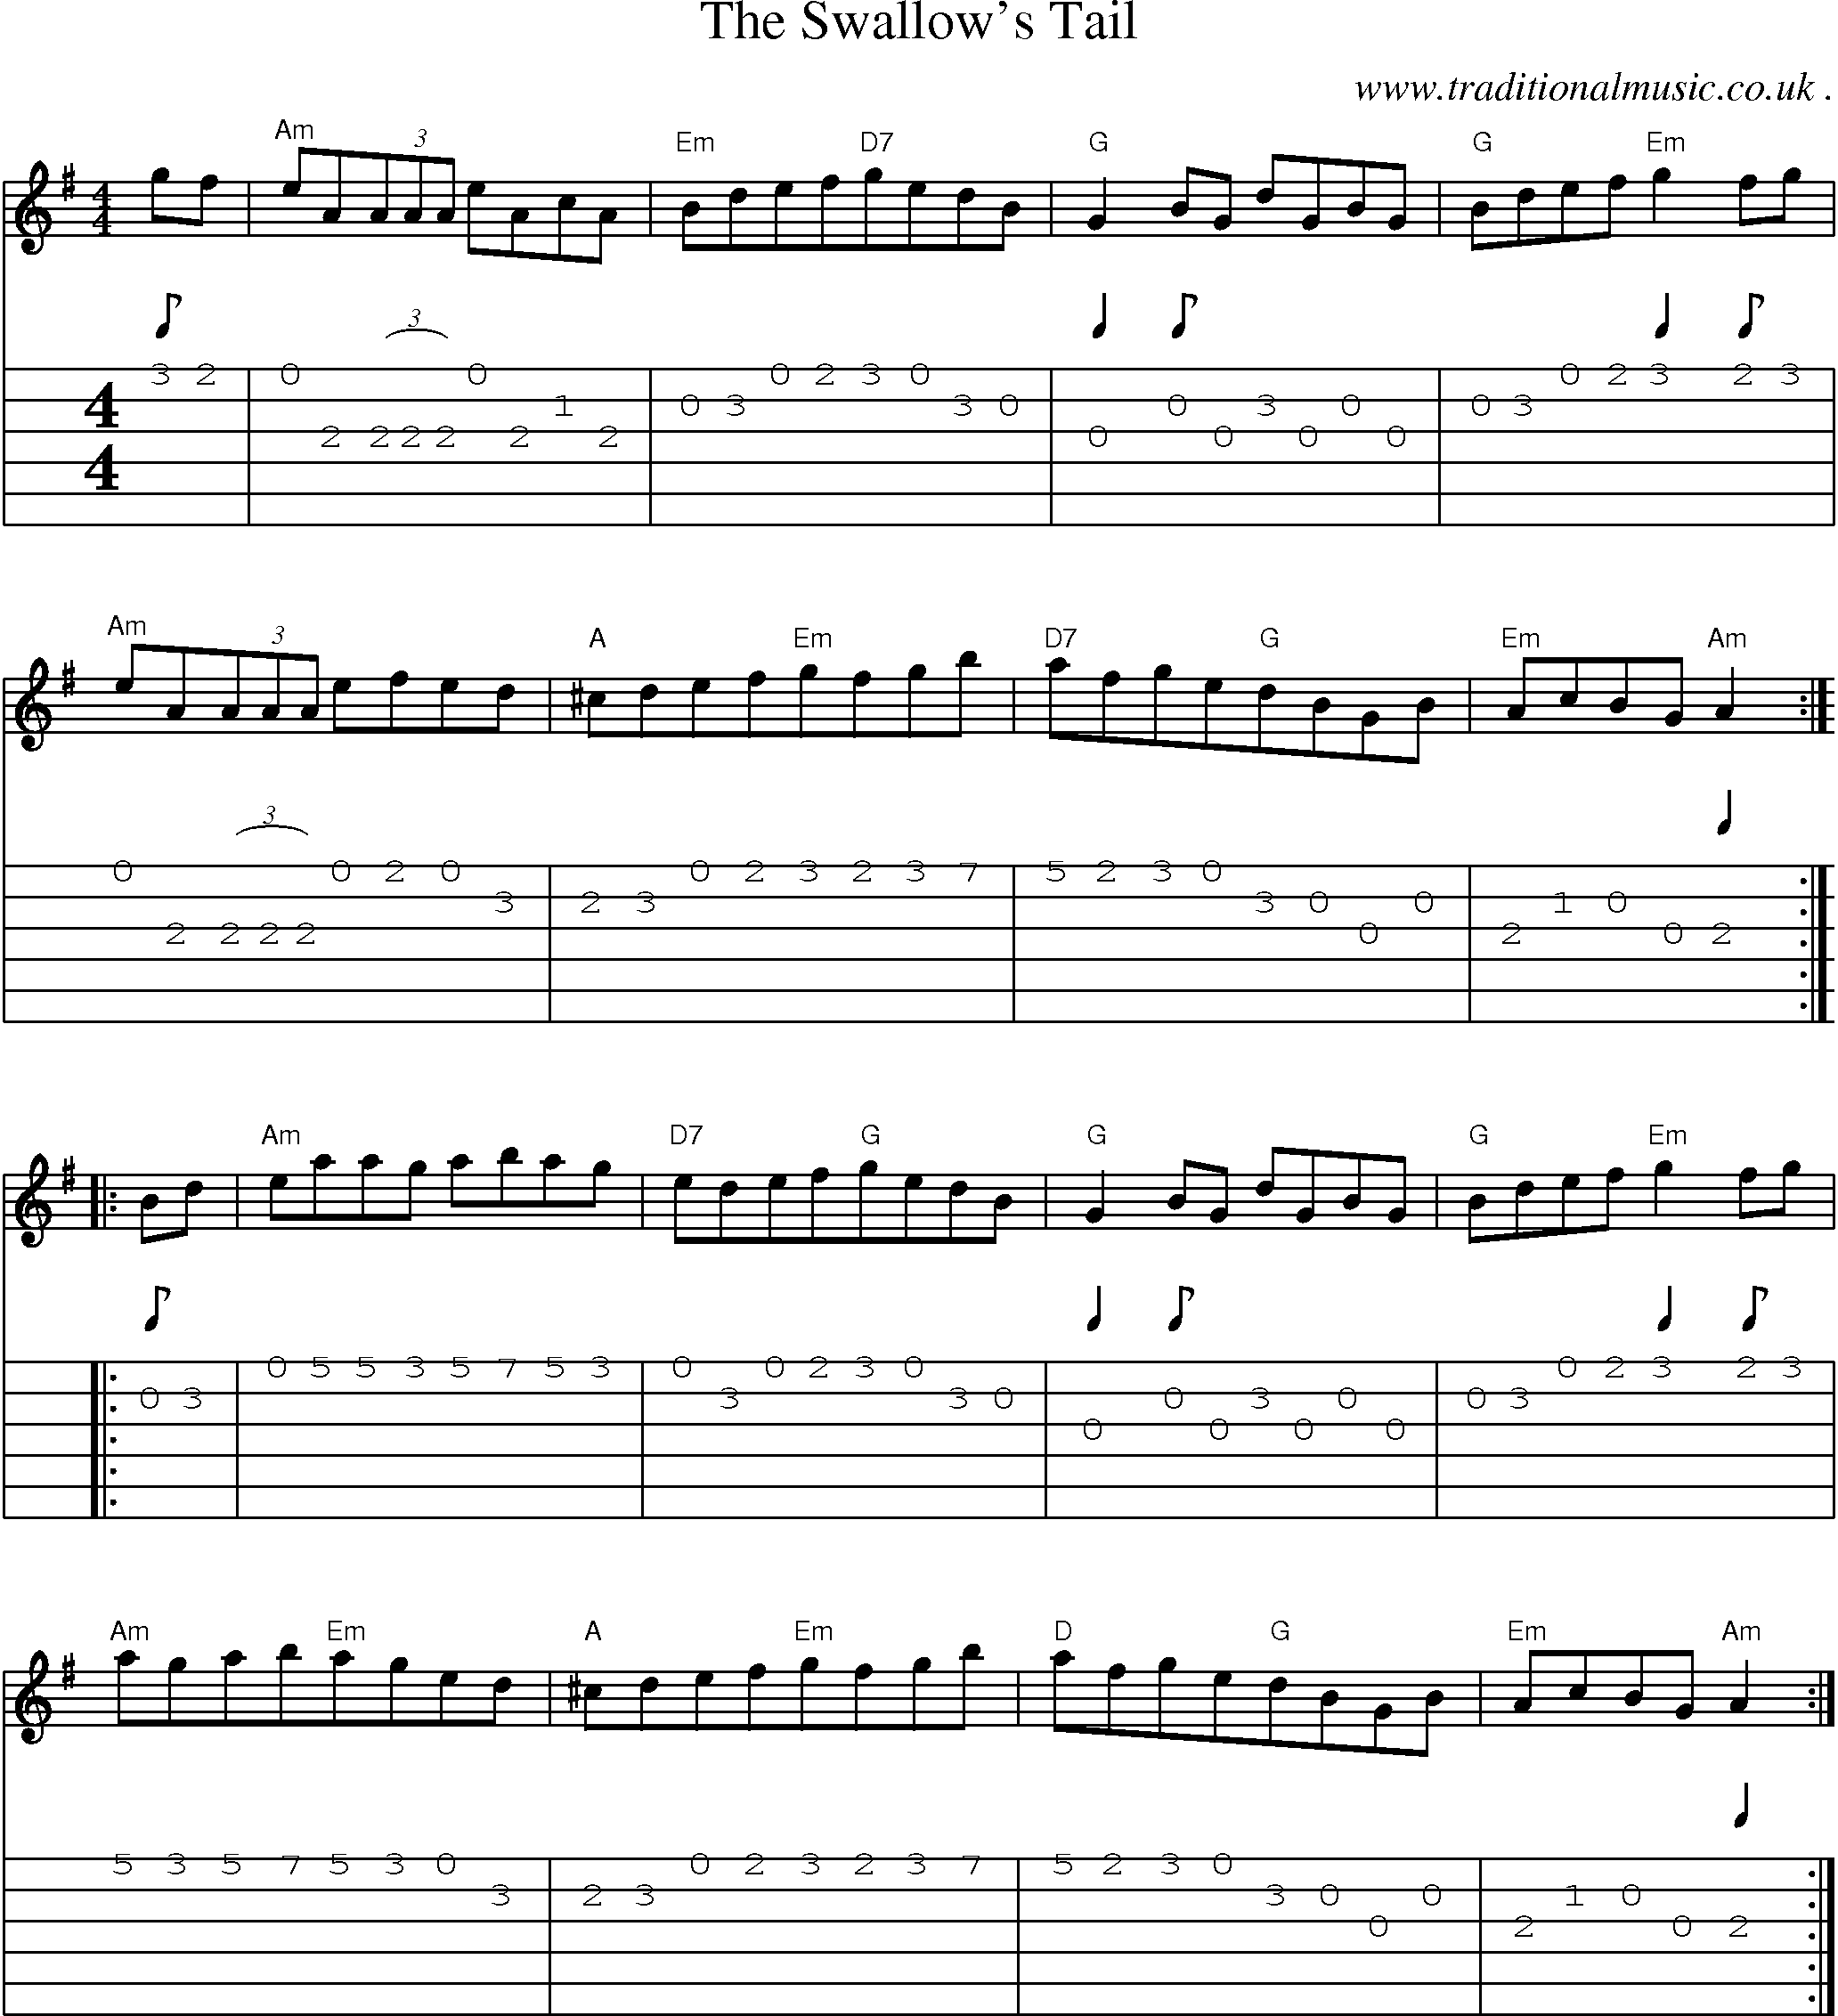 Sheet-Music and Guitar Tabs for The Swallows Tail